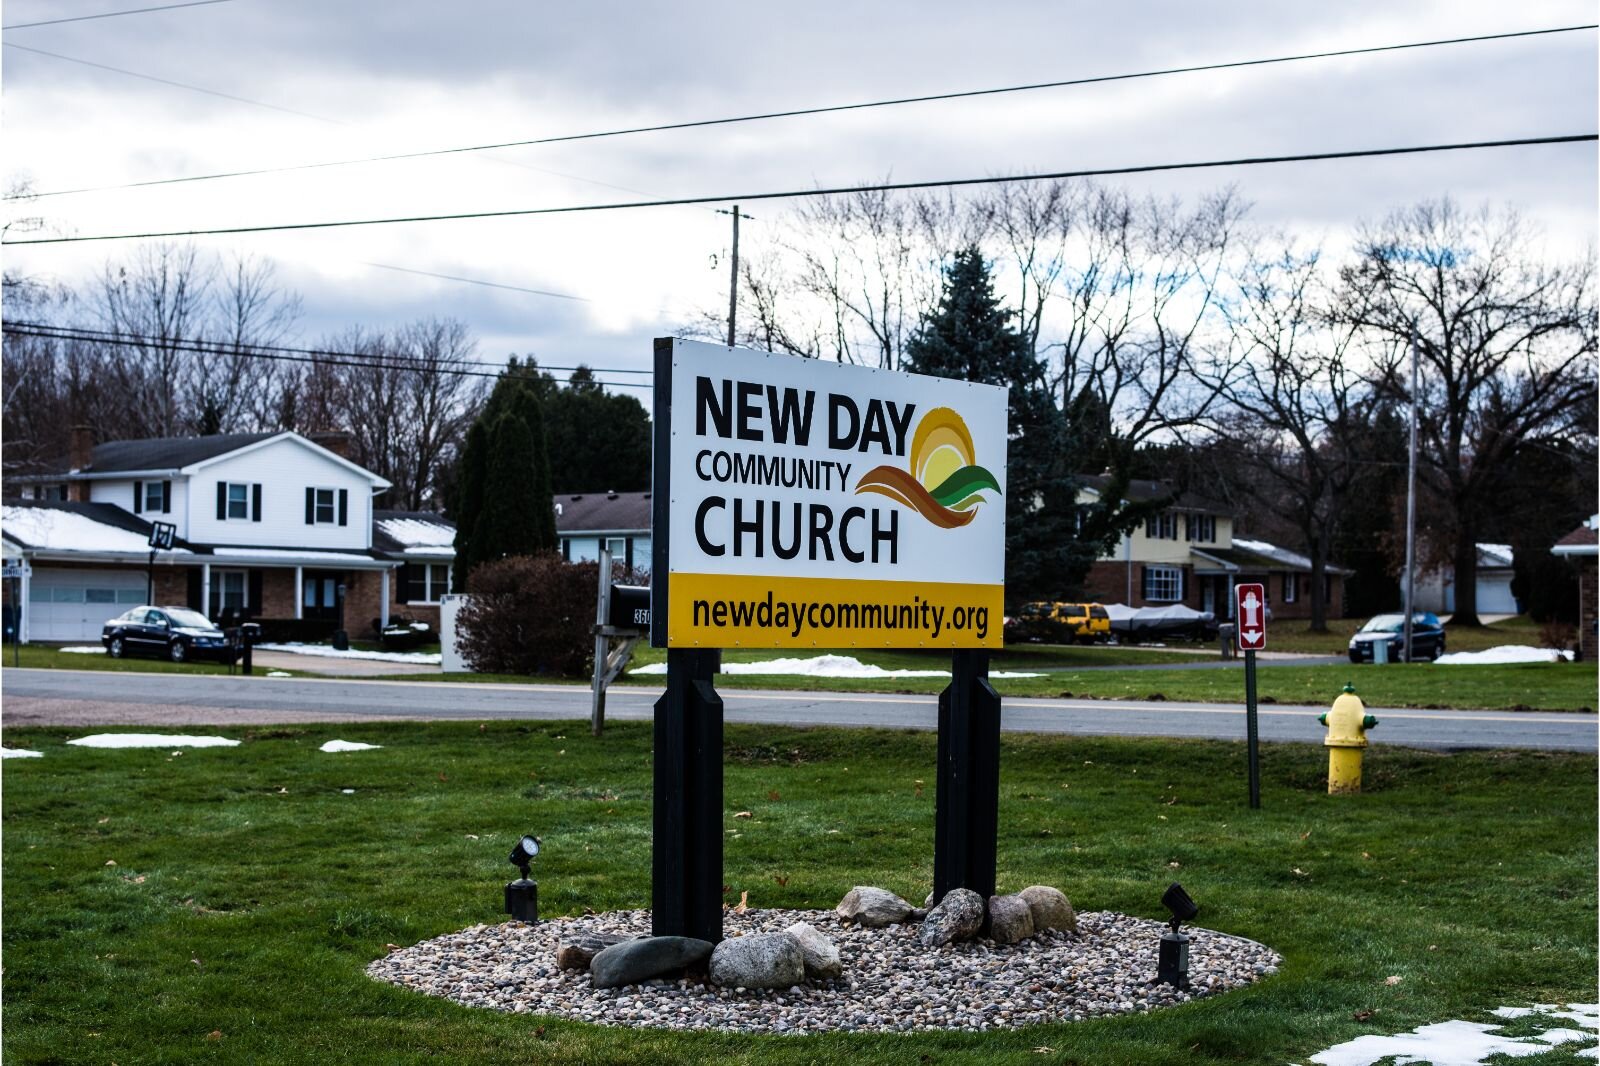 New Day Community Church’s back 15 acres is surrounded by several neighborhoods consisting of over 500 homes.